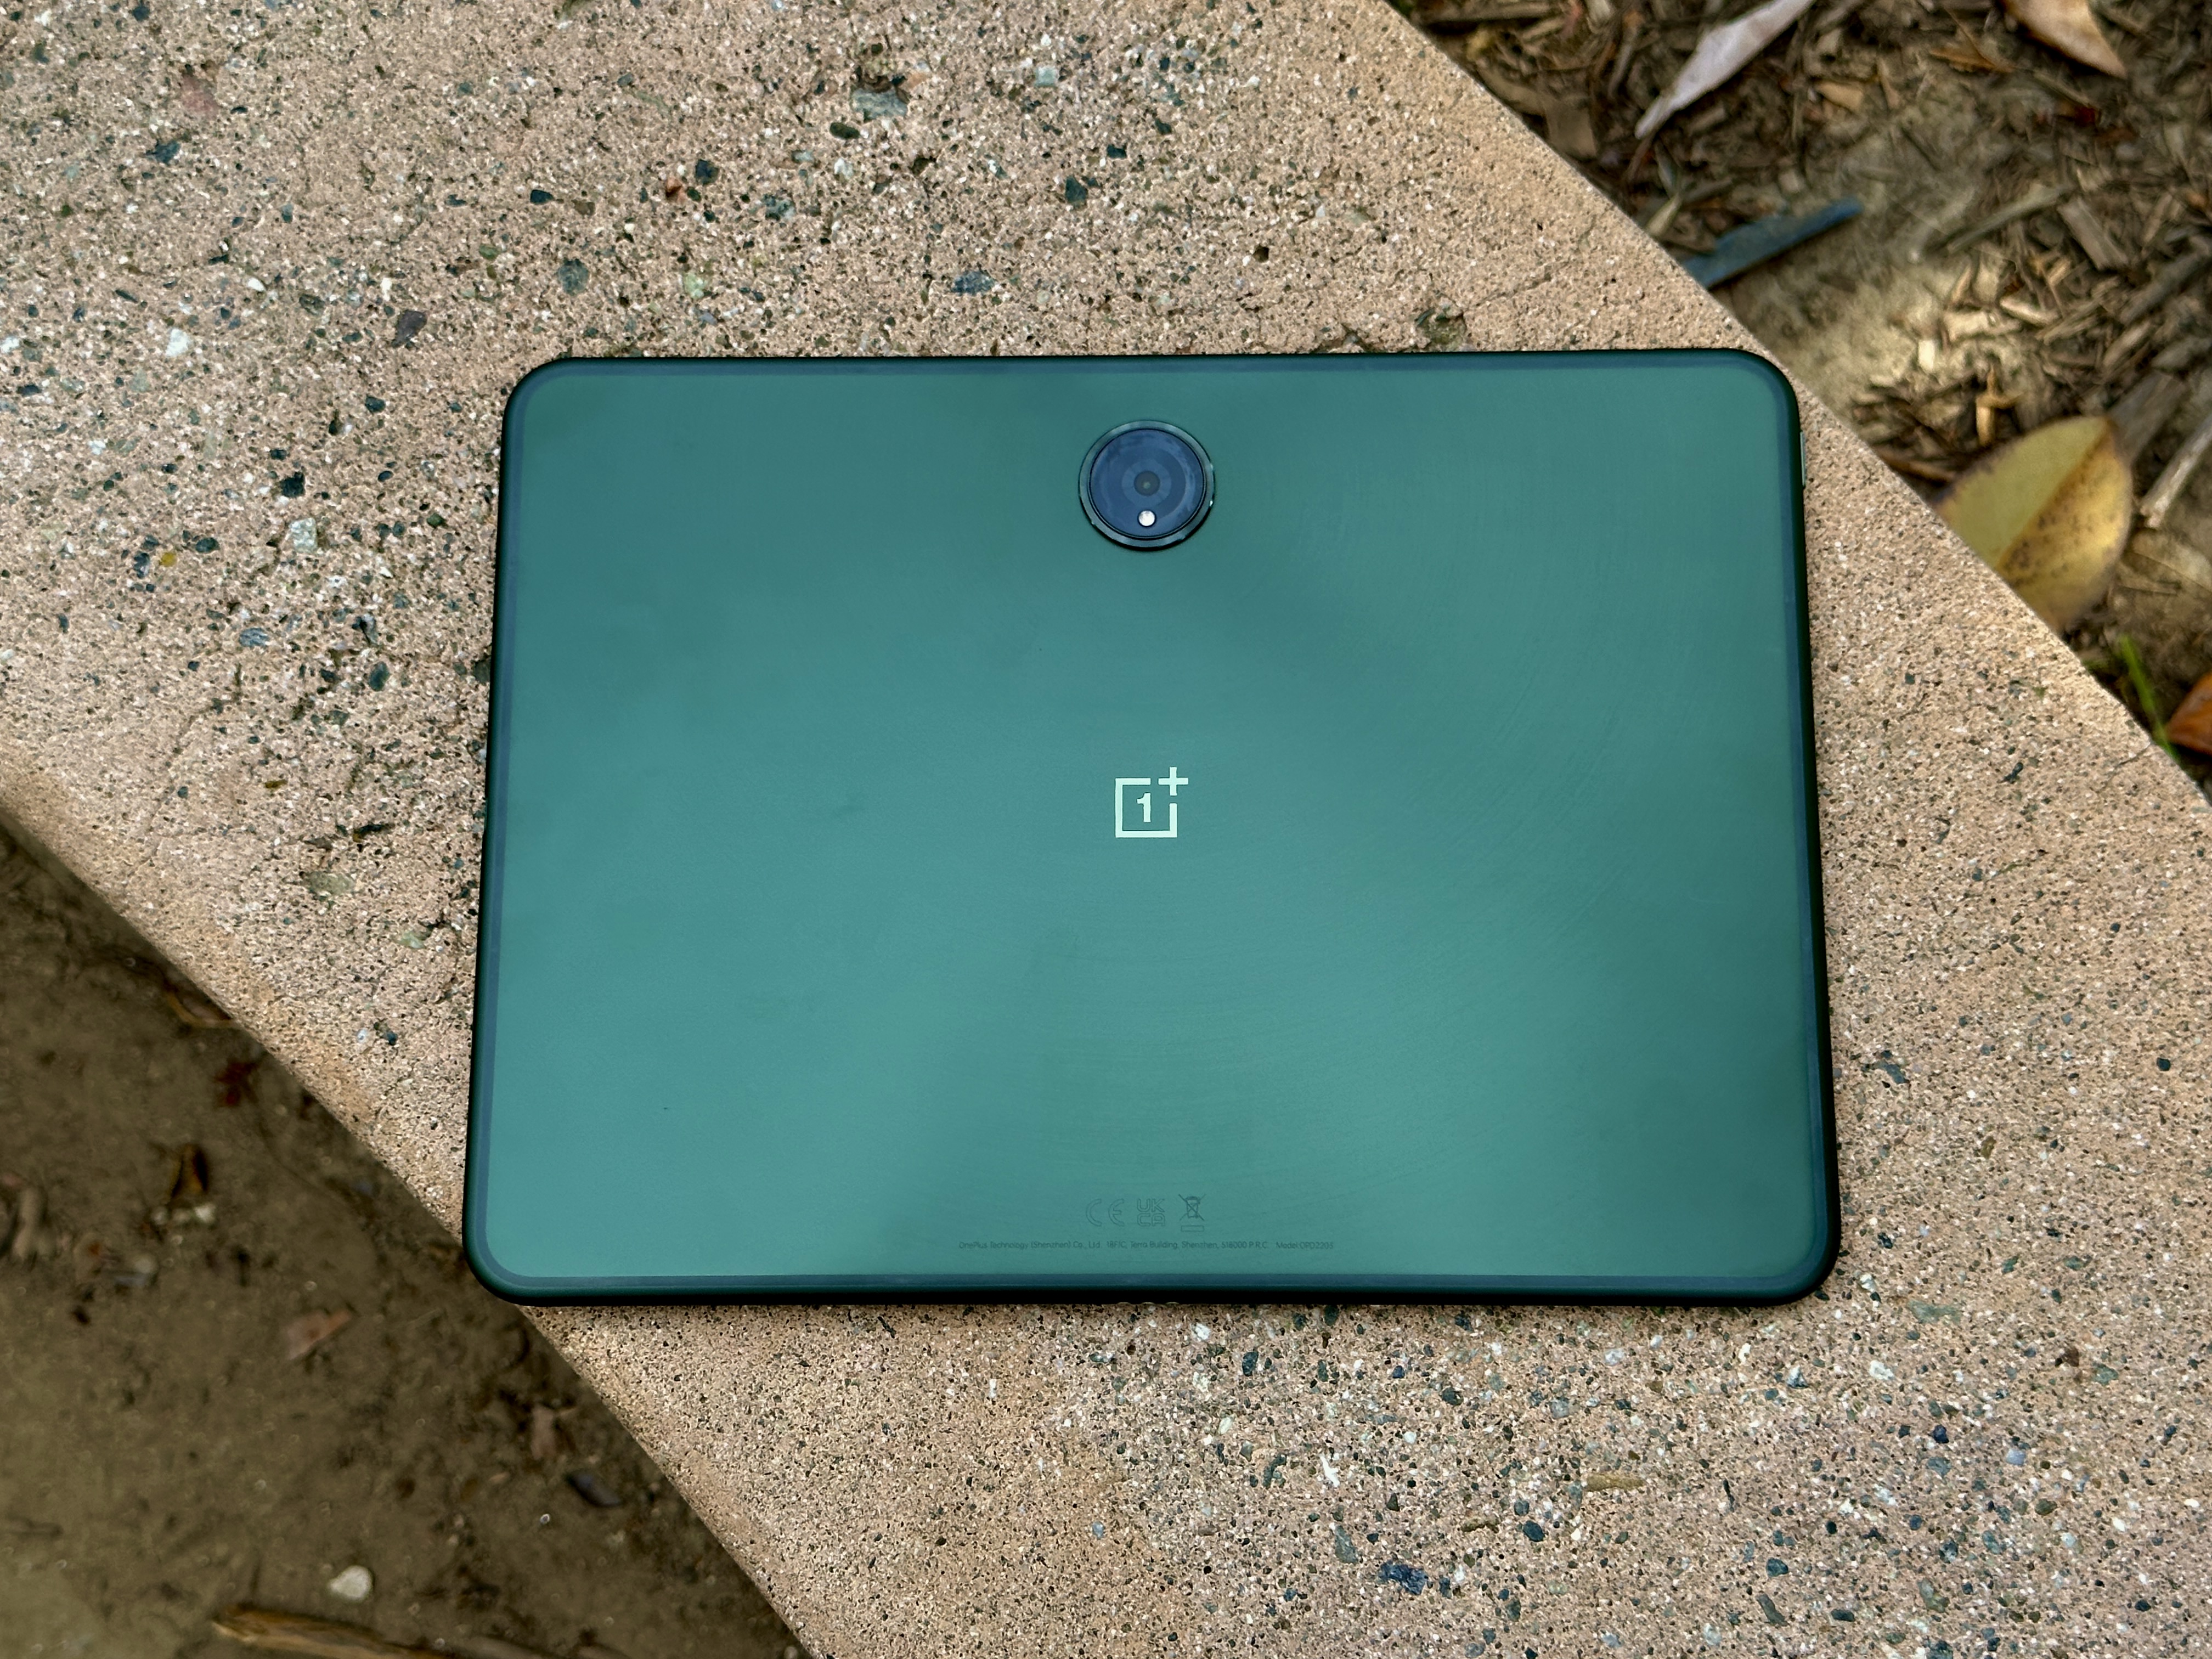 OnePlus Pad on a concrete bench